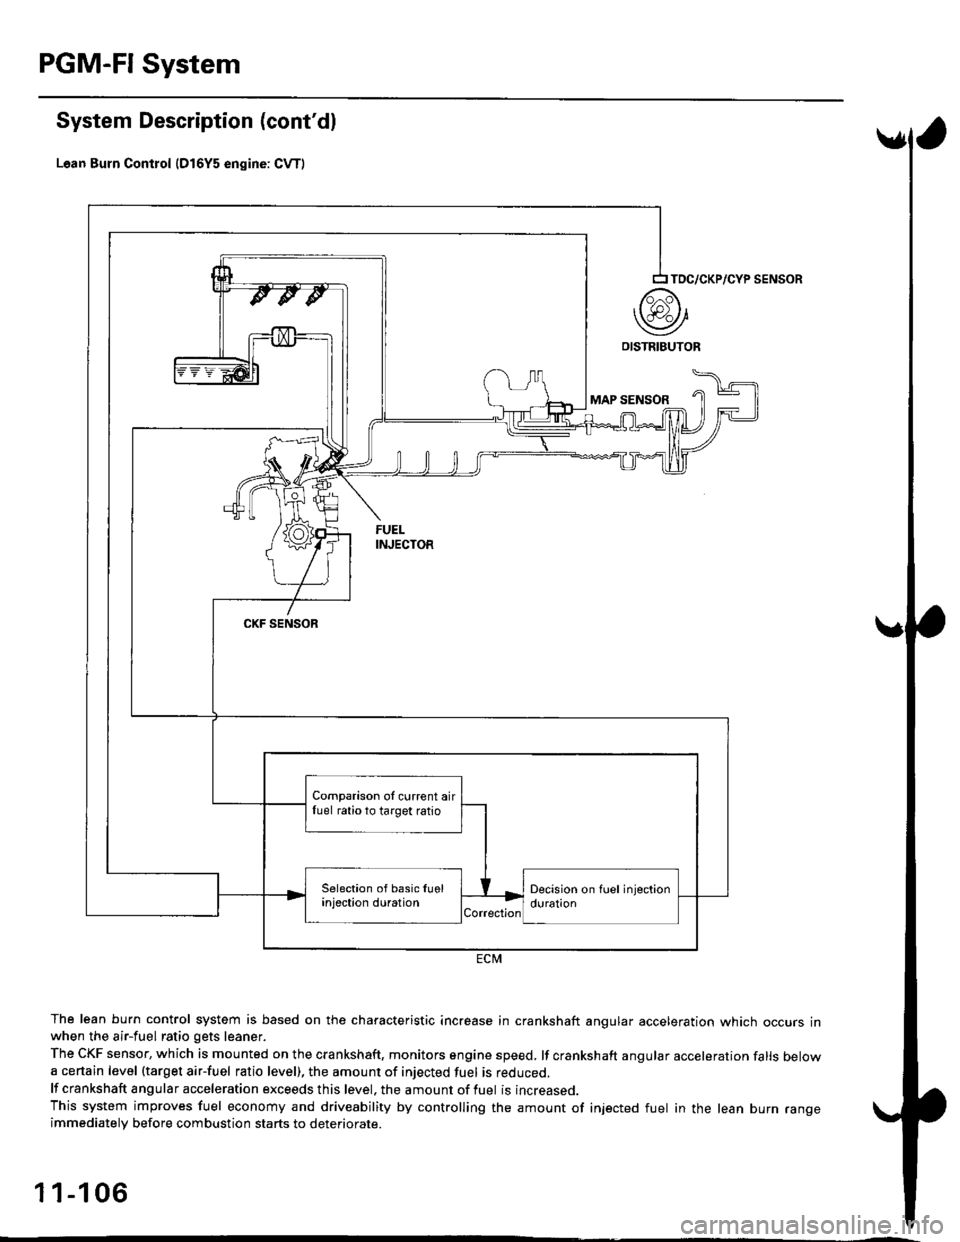 HONDA CIVIC 1999 6.G Repair Manual PGM-FI System
System Description (contdl
Lean Burn Control {D16Y5 engine: CvT)
The lean burn control system is based on the characteristic increase in crankshaft angular acceleration which occurs inw